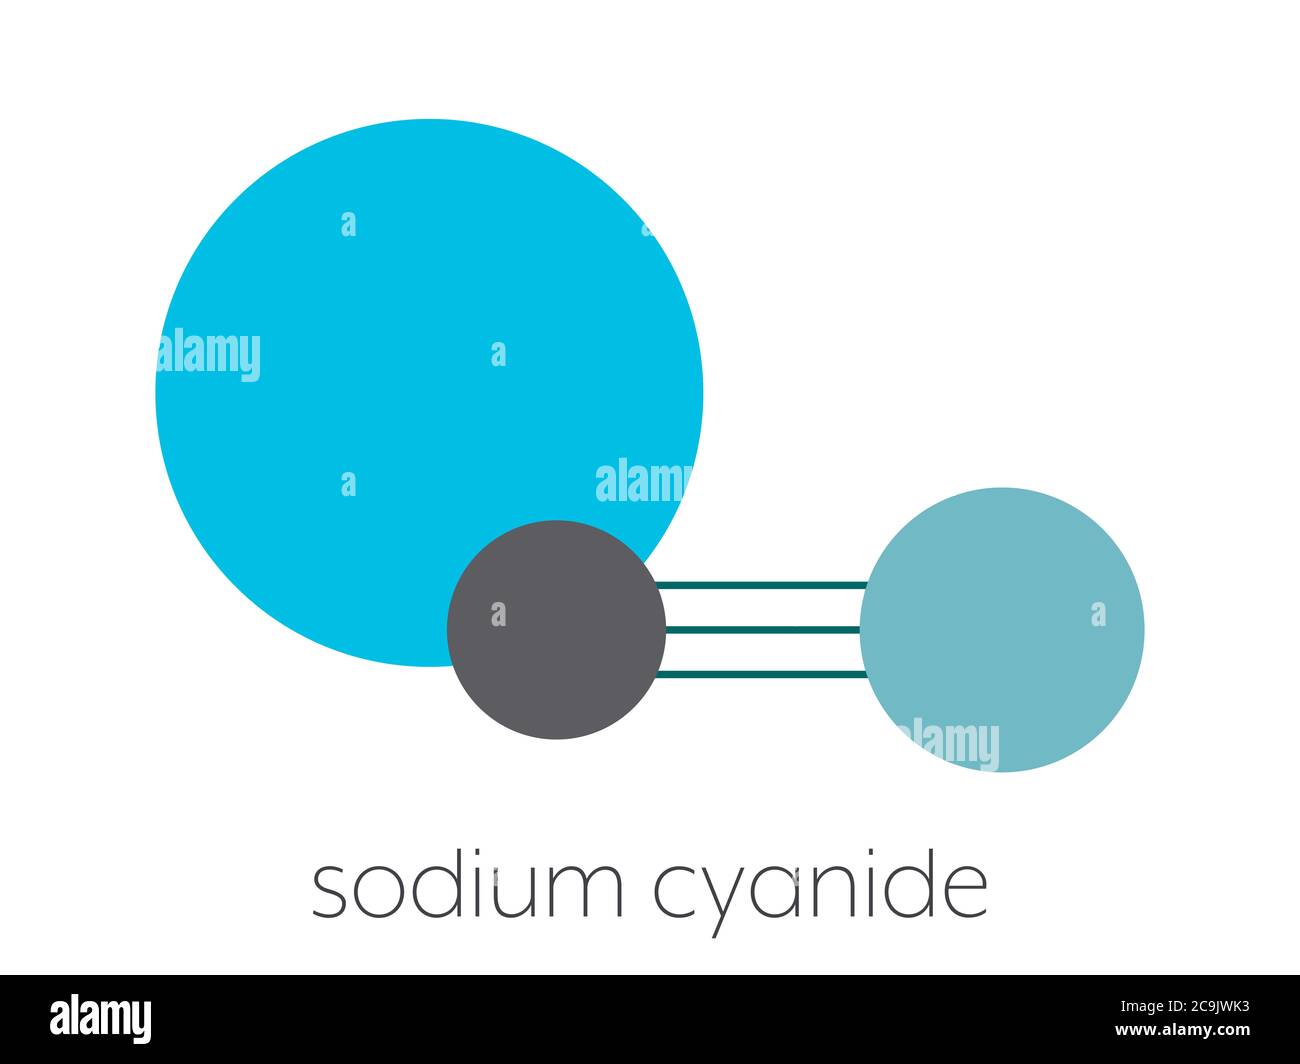 Sodium cyanide, chemical structure. Stylized skeletal formula (chemical structure): Atoms are shown as color-coded circles connected by thin bonds, on Stock Photo